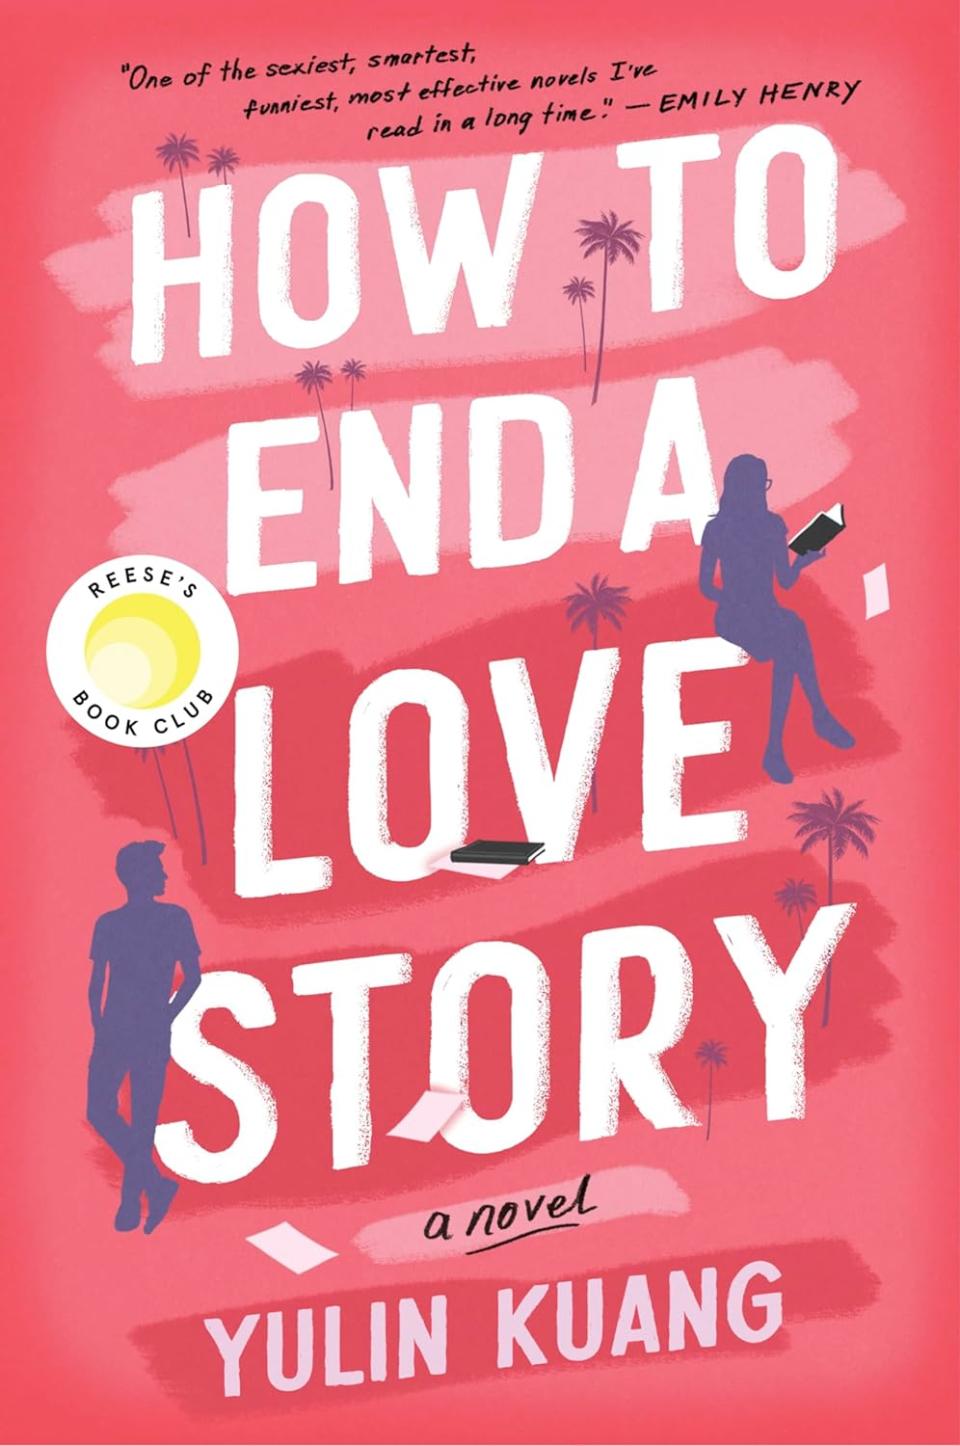 ‘How to End a Love Story’ by Yulin Kuang